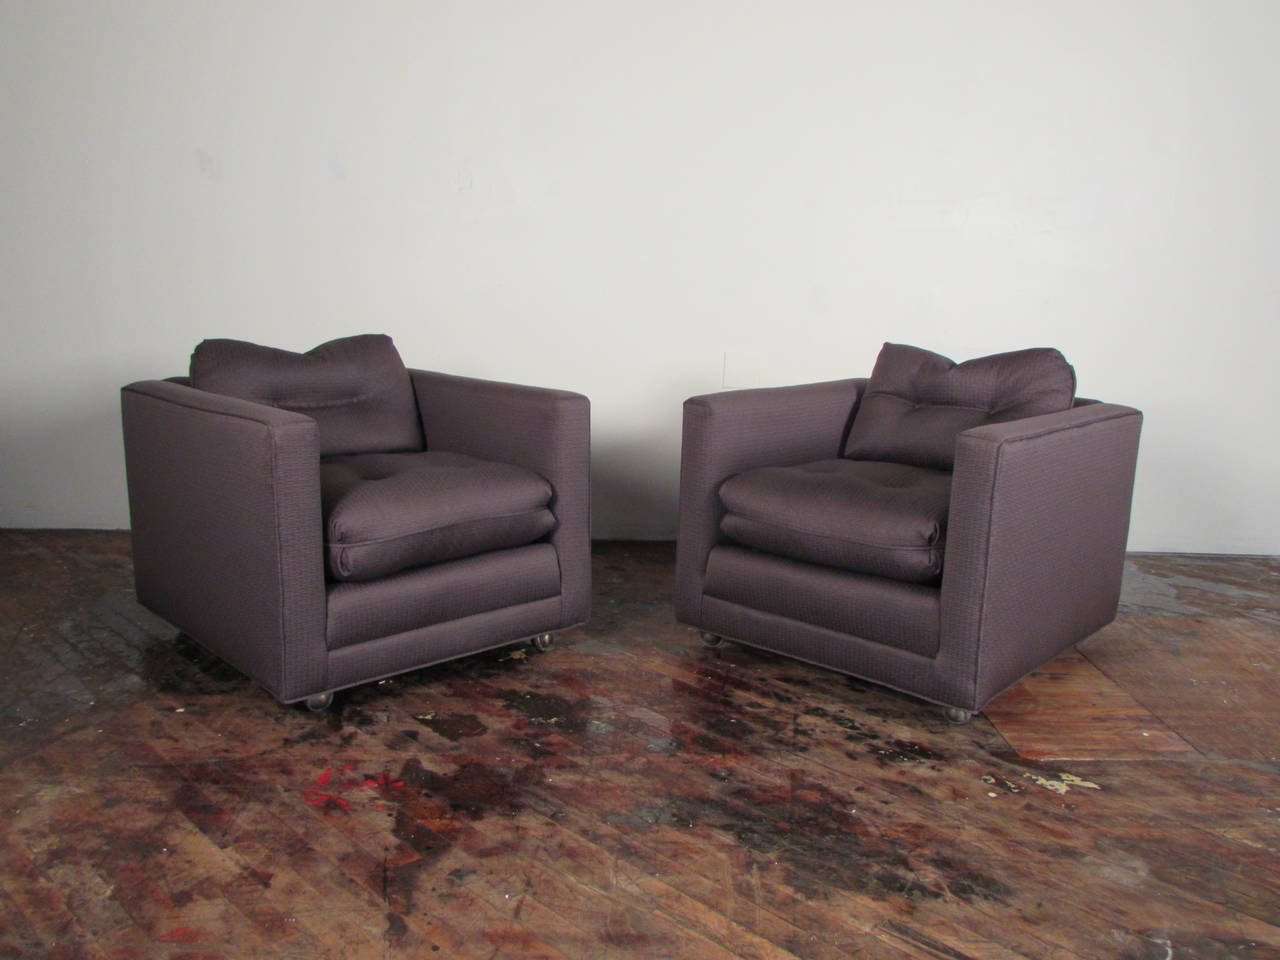 We offer personal white glove delivery to NYC!

Handsome pair of 1970s Henredon club chairs, freshly reupholstered in textured charcoal gray matelassé. Impeccable quality and Classic, timeless styling in a rich neutral. Seat and back cushions are